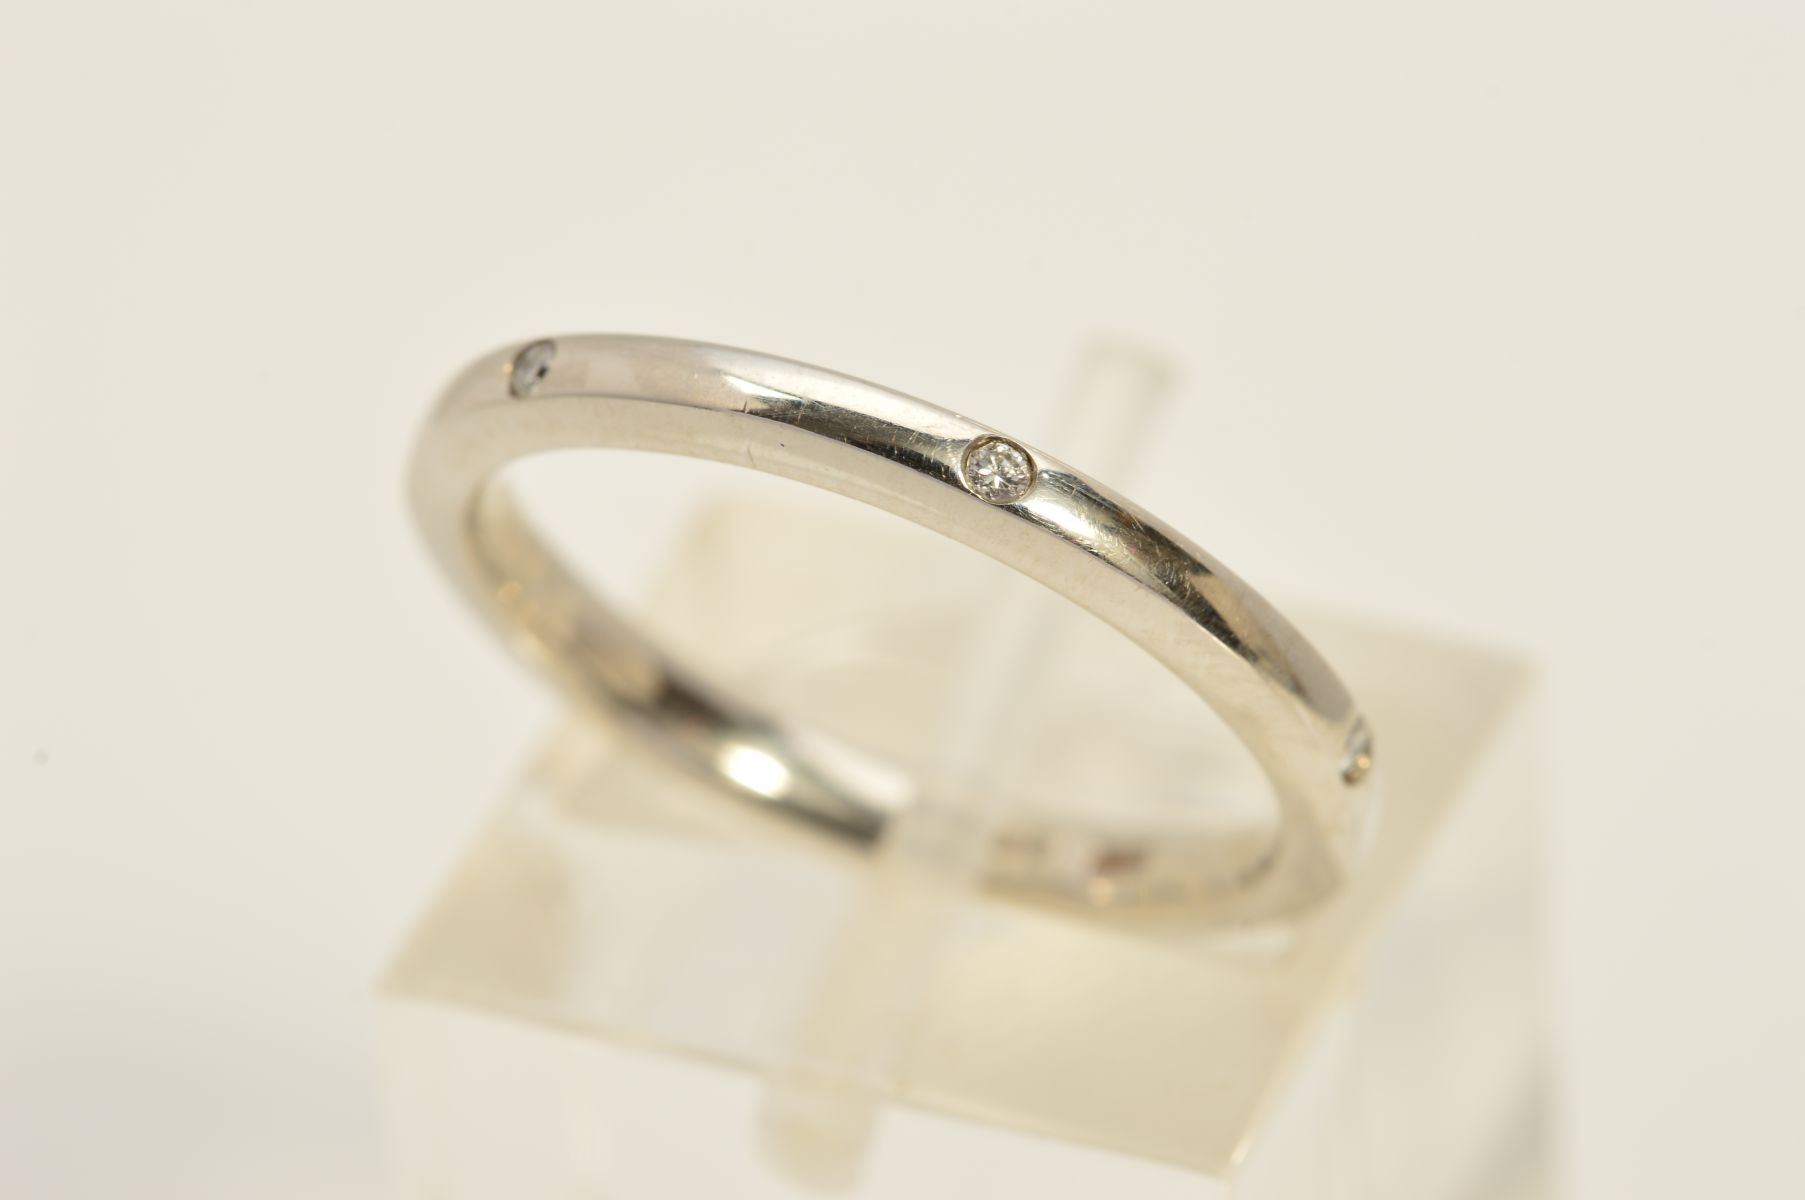 A MODERN PLATINUM DIAMOND SET WEDDING BAND, measuring approximately 2.5mm in width, total diamond